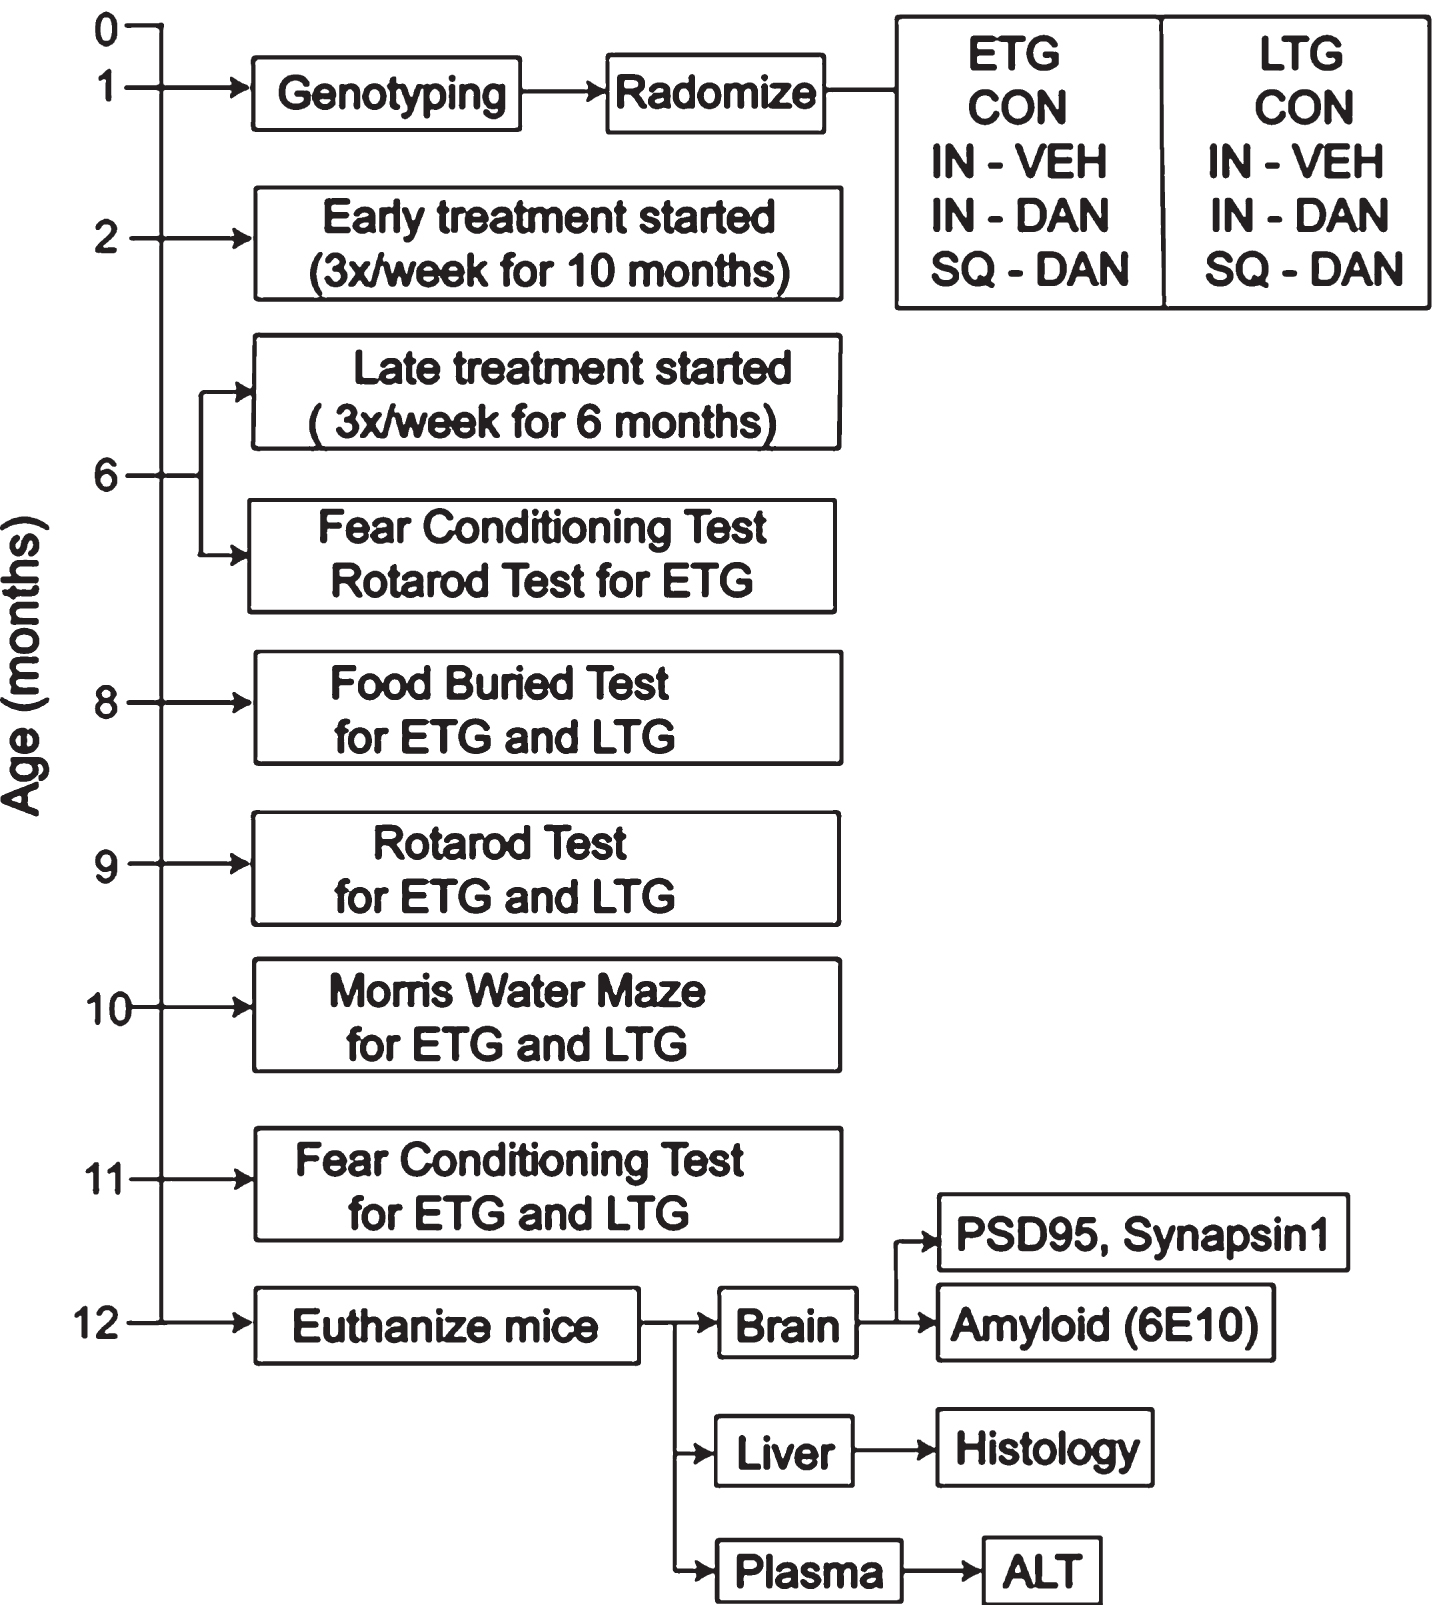 Experimental design. Timeline for treatments, behavioral tests, and euthanasia. Twelve experimental groups were designed based on genotype (5XFAD, WT), age when treatment began (Early Treatment (ETG), Late Treatment (LTG) groups), and the administration route of dantrolene (Intranasal, Subcutaneous).